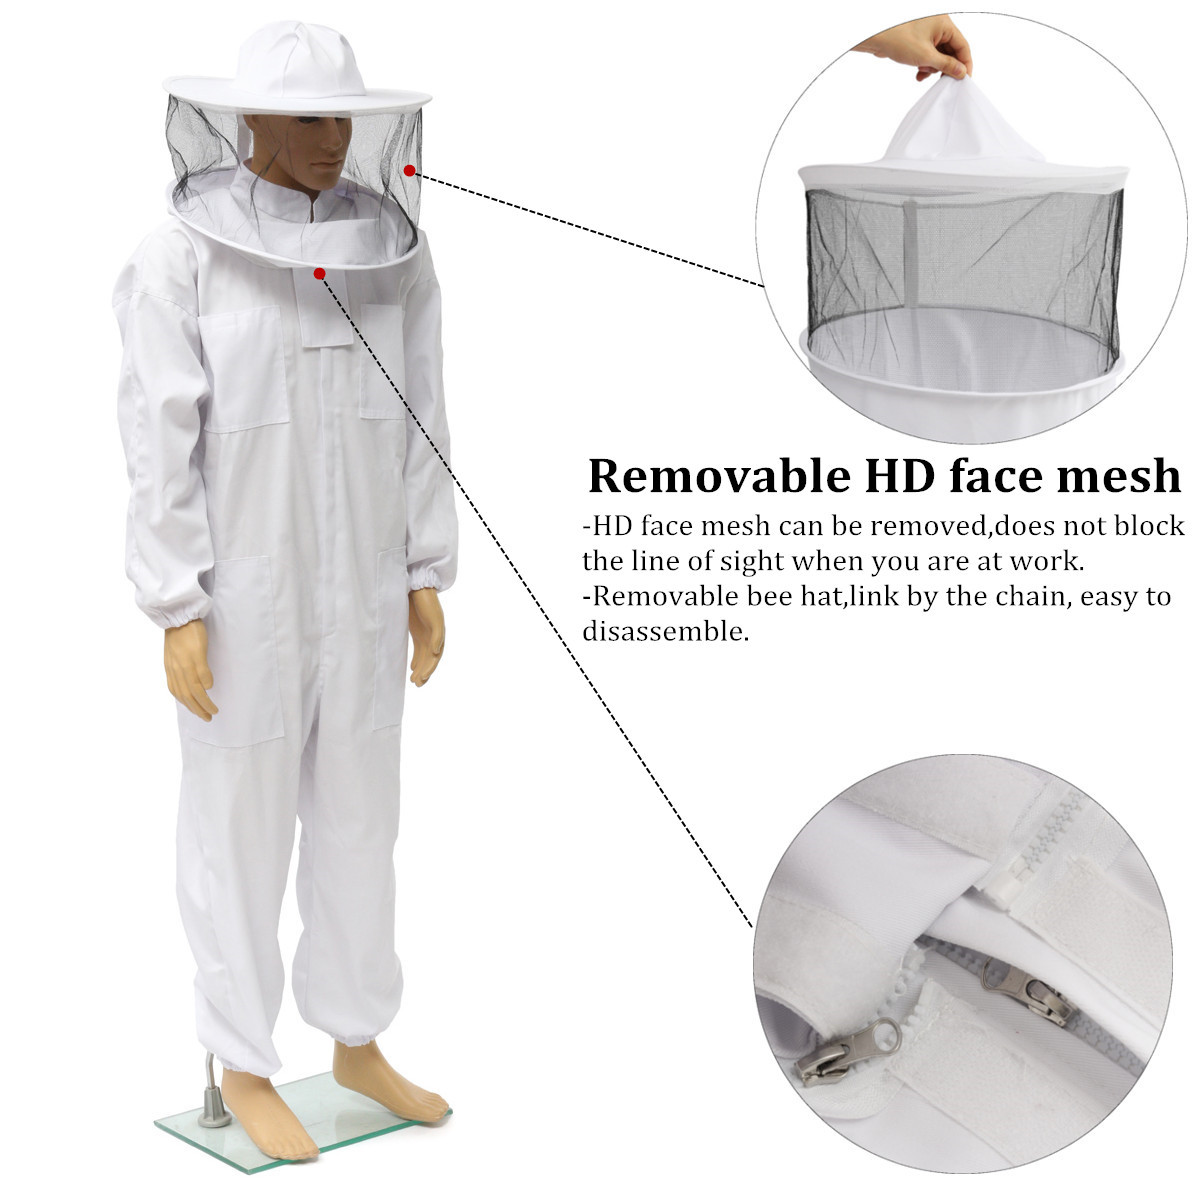 Beekeepers-Bee-Keeping-Cotton-Full-Protector-Suit-With-Veil-Hat-Hood-Bee-Suit-XL-XXL-XXL-1277290-3